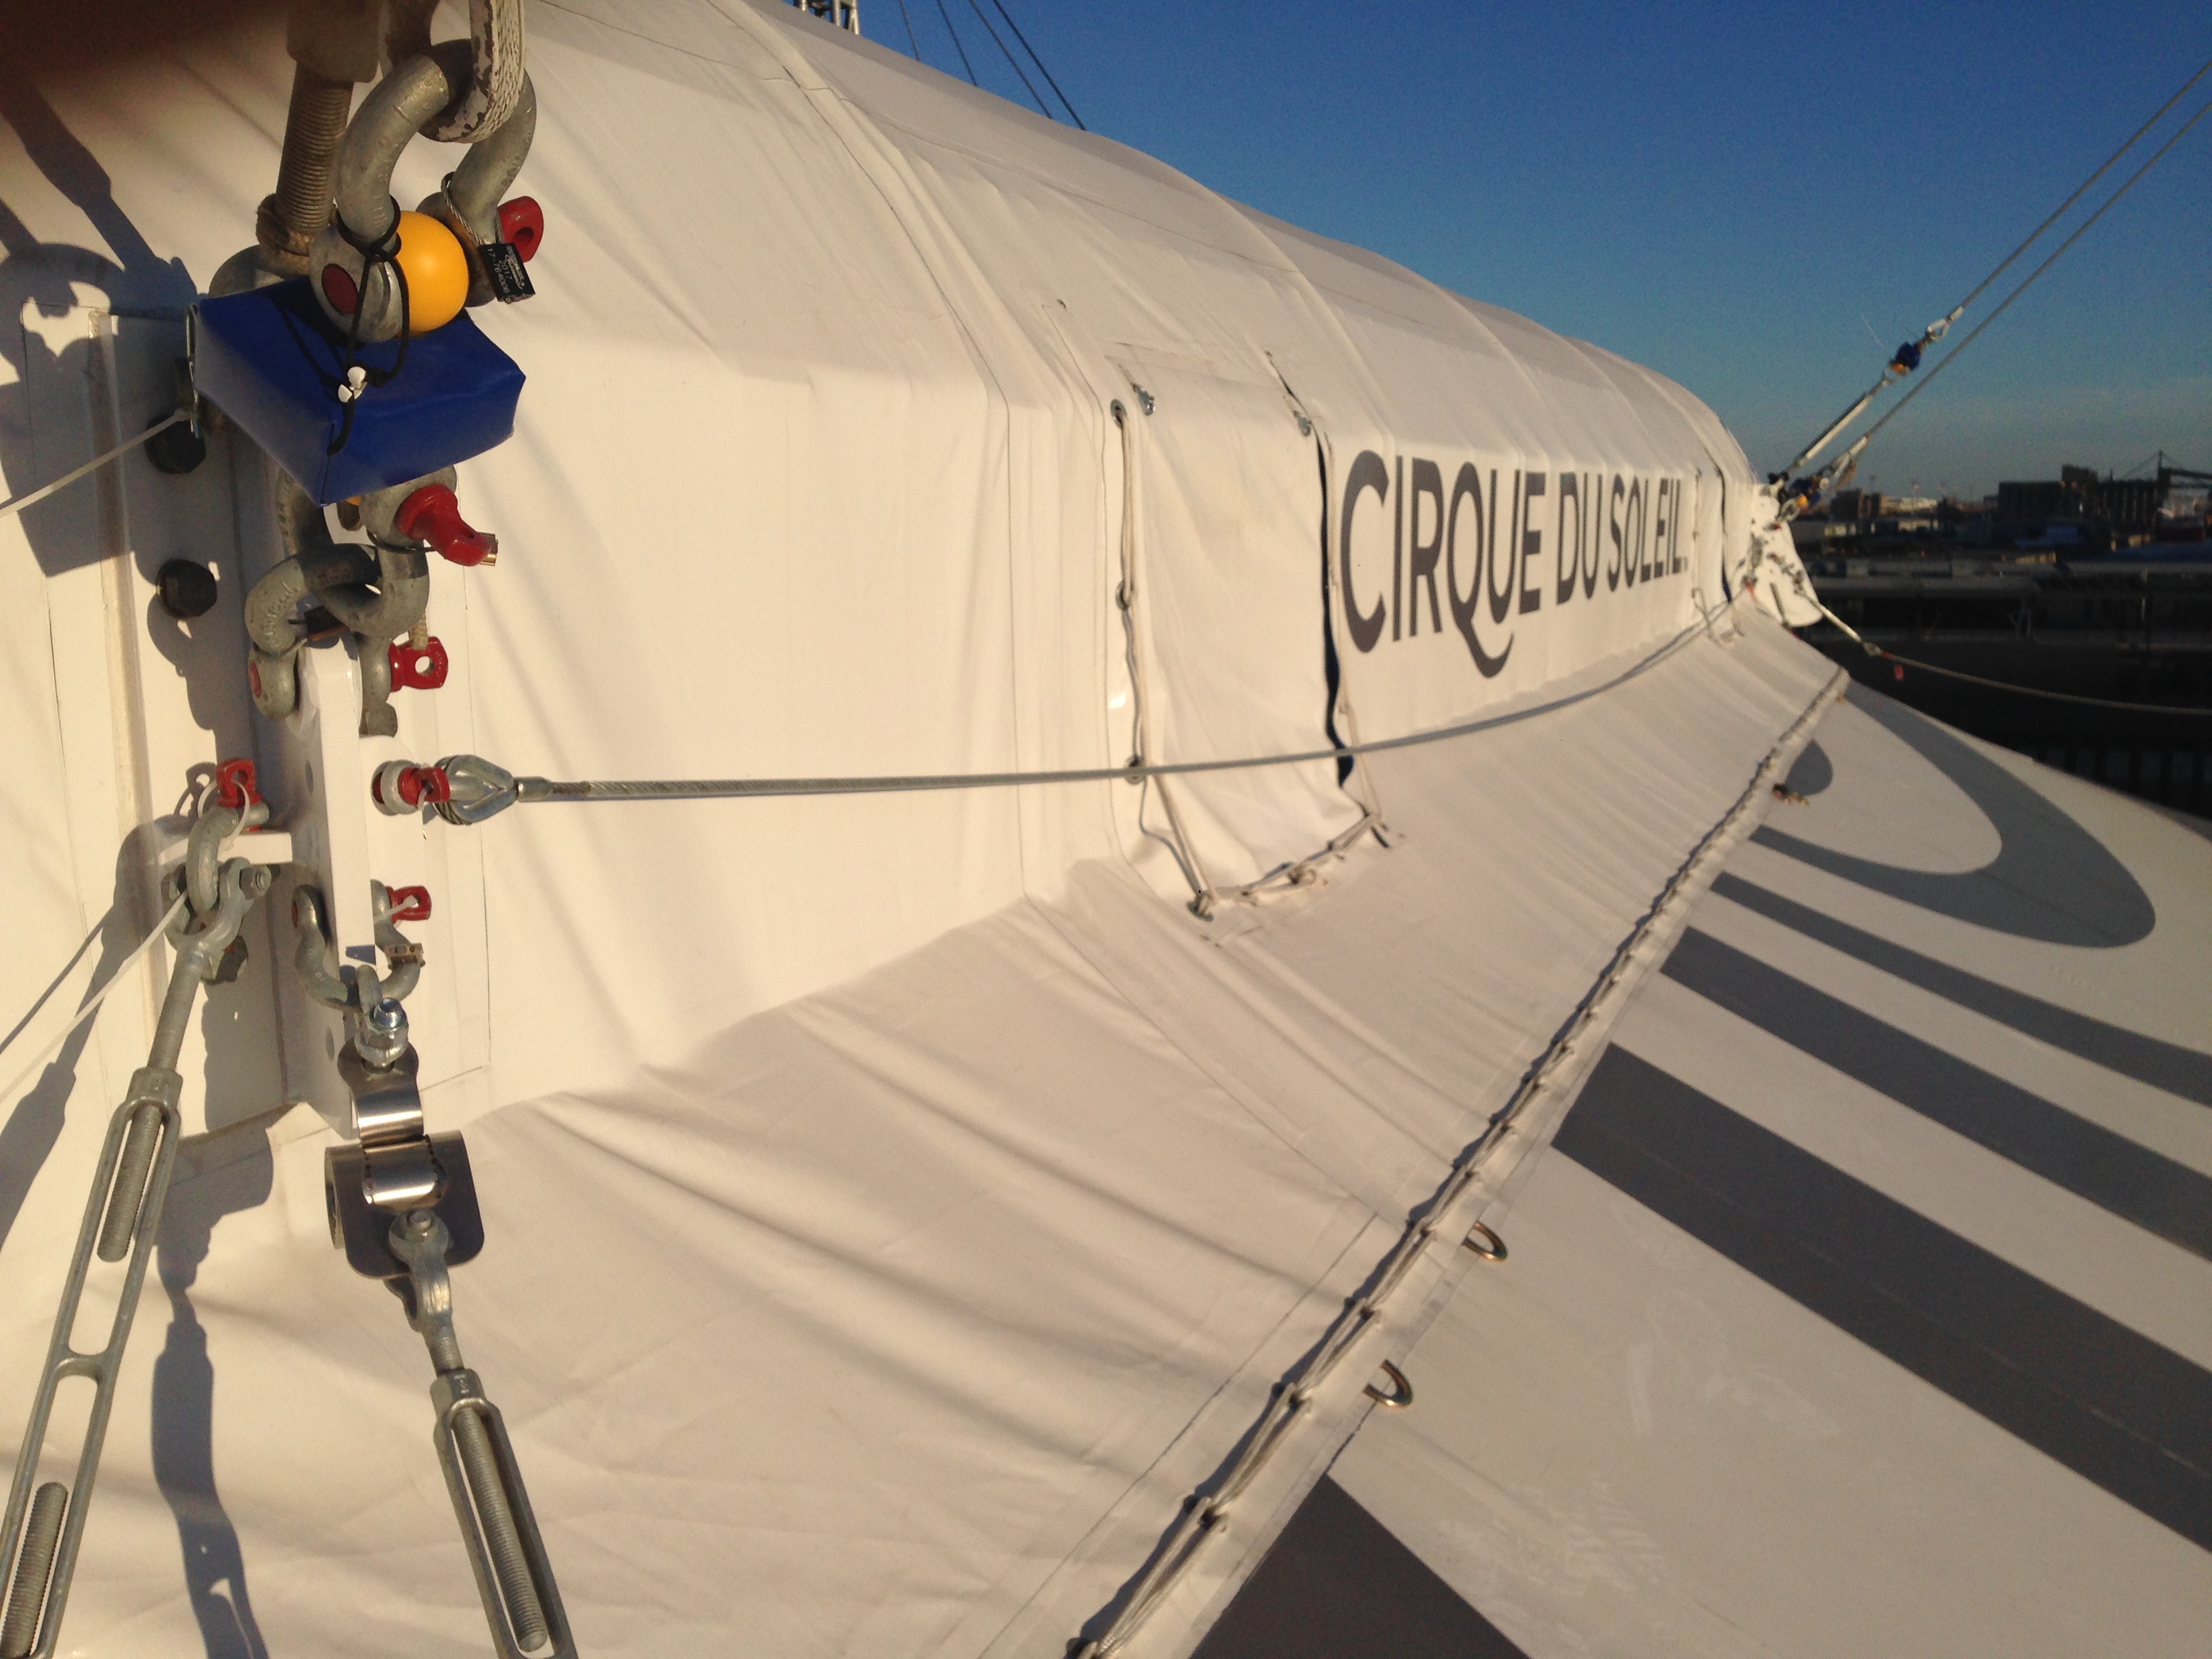 A load cell is installed on Cirque du Soleil's big top tent